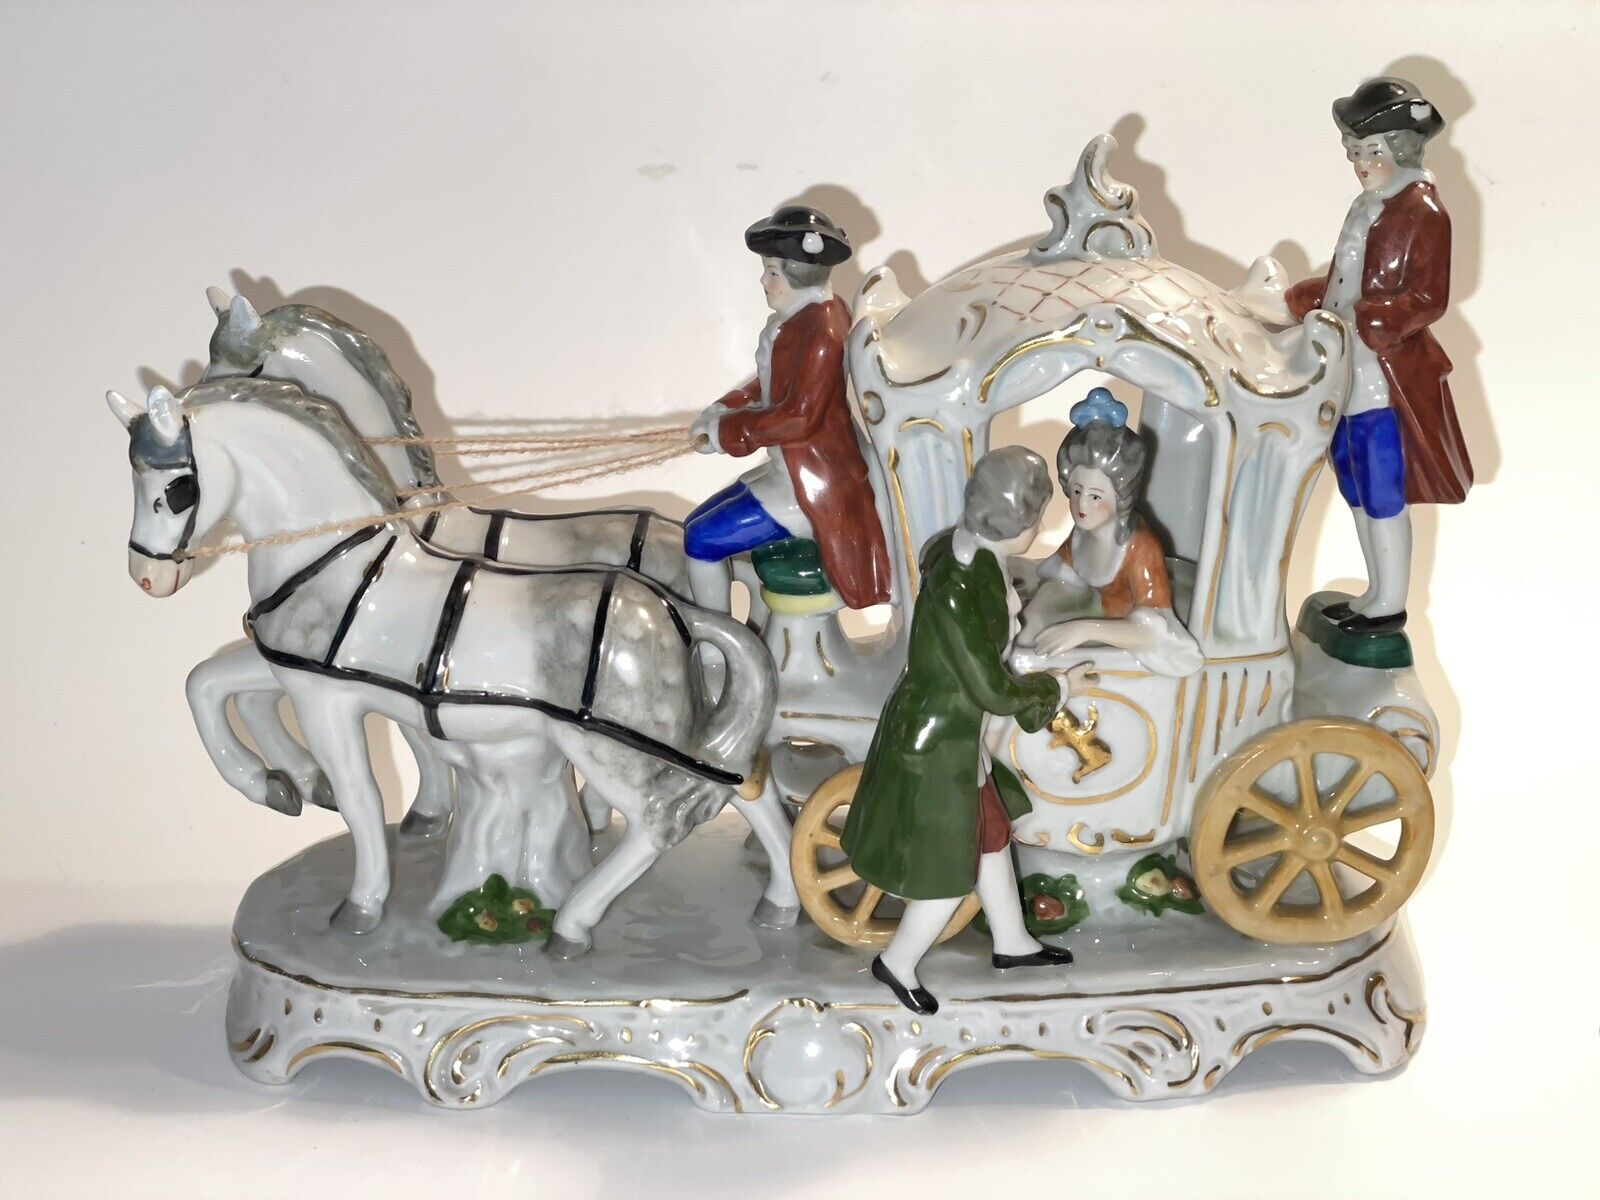 Antique 1809 German Porcelain Horse And Carriage With Footman Figurine